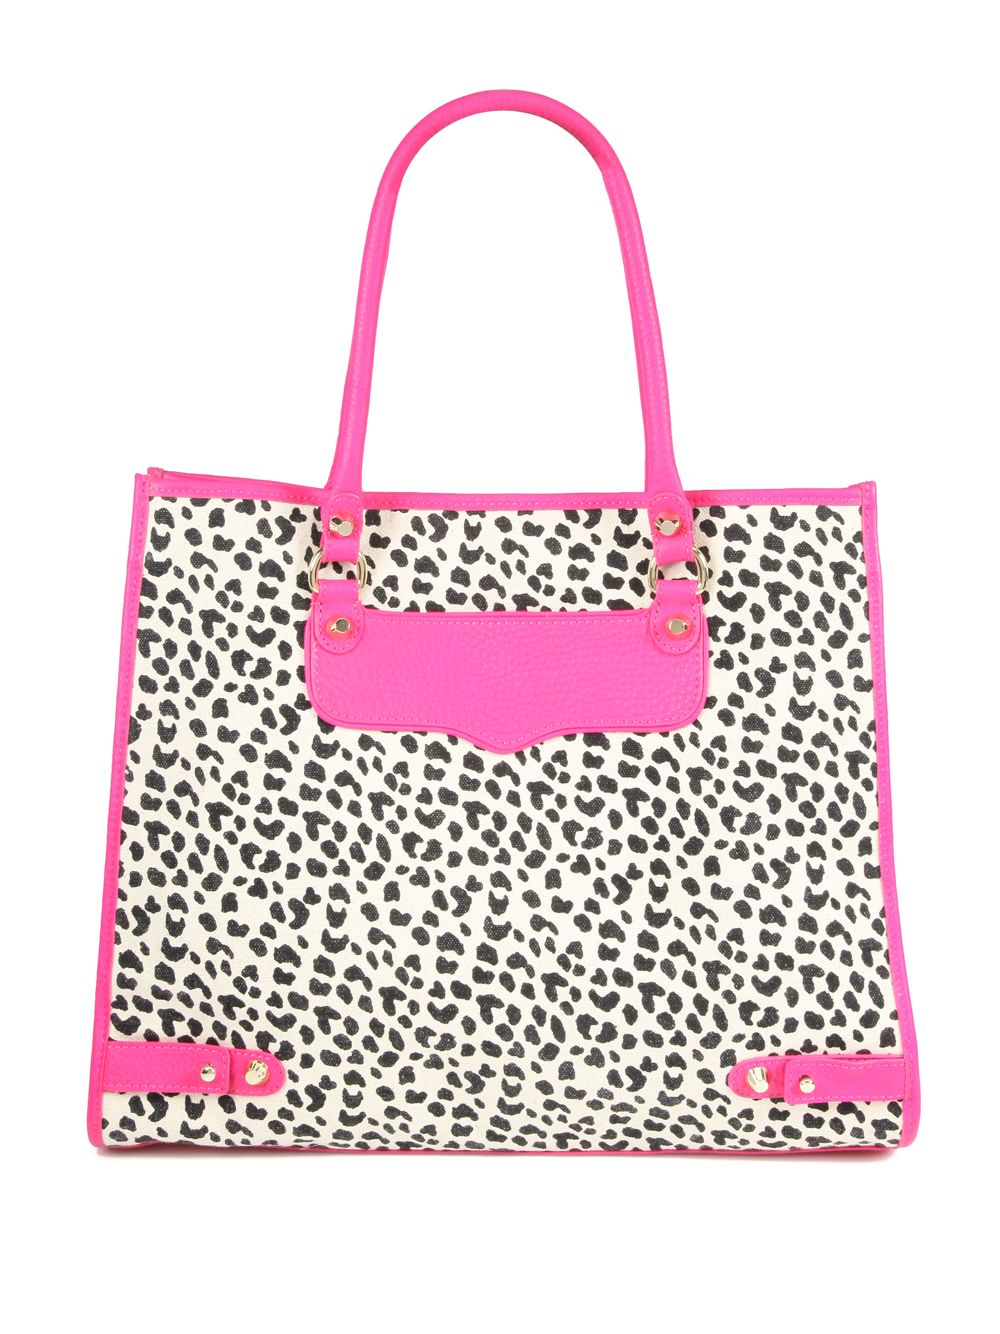 Lyst - Rebecca Minkoff Cheetah Print Leather Canvas Tote Bag in Pink